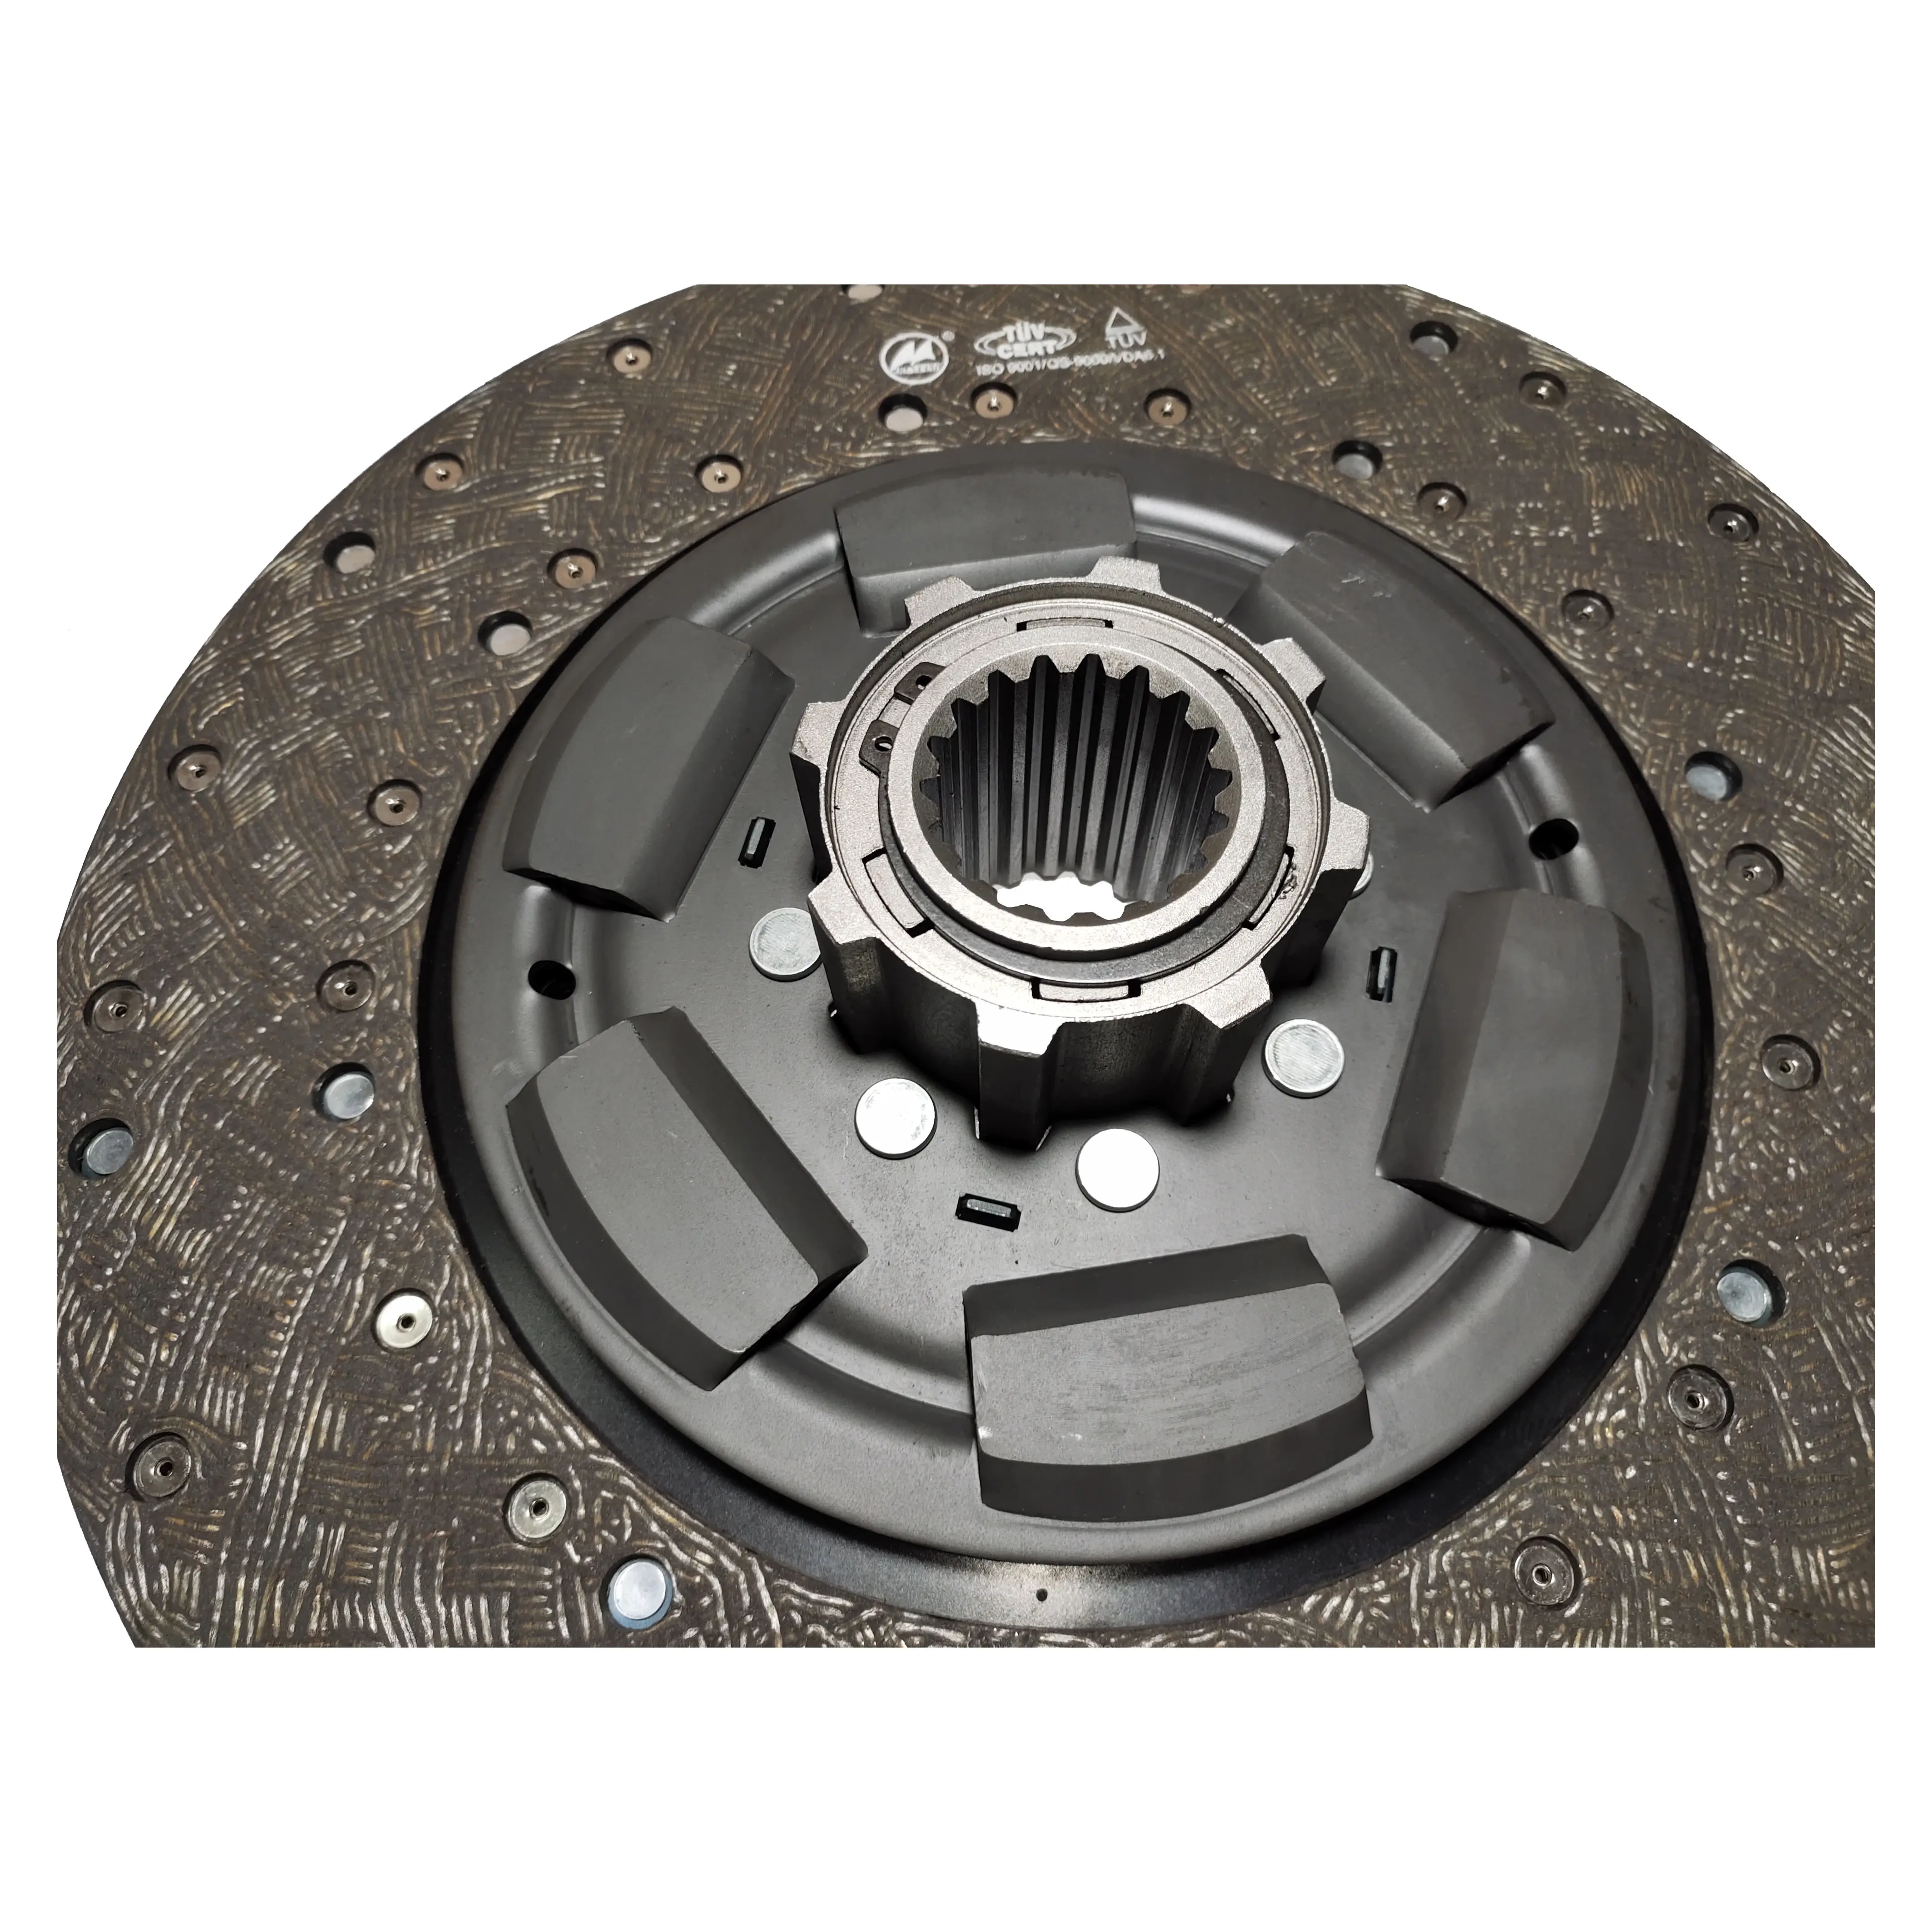 Clutch Disc 1878 056 331 Size 400mm suitable for Mercedes-Benz with Maxeen No. M01 400 03